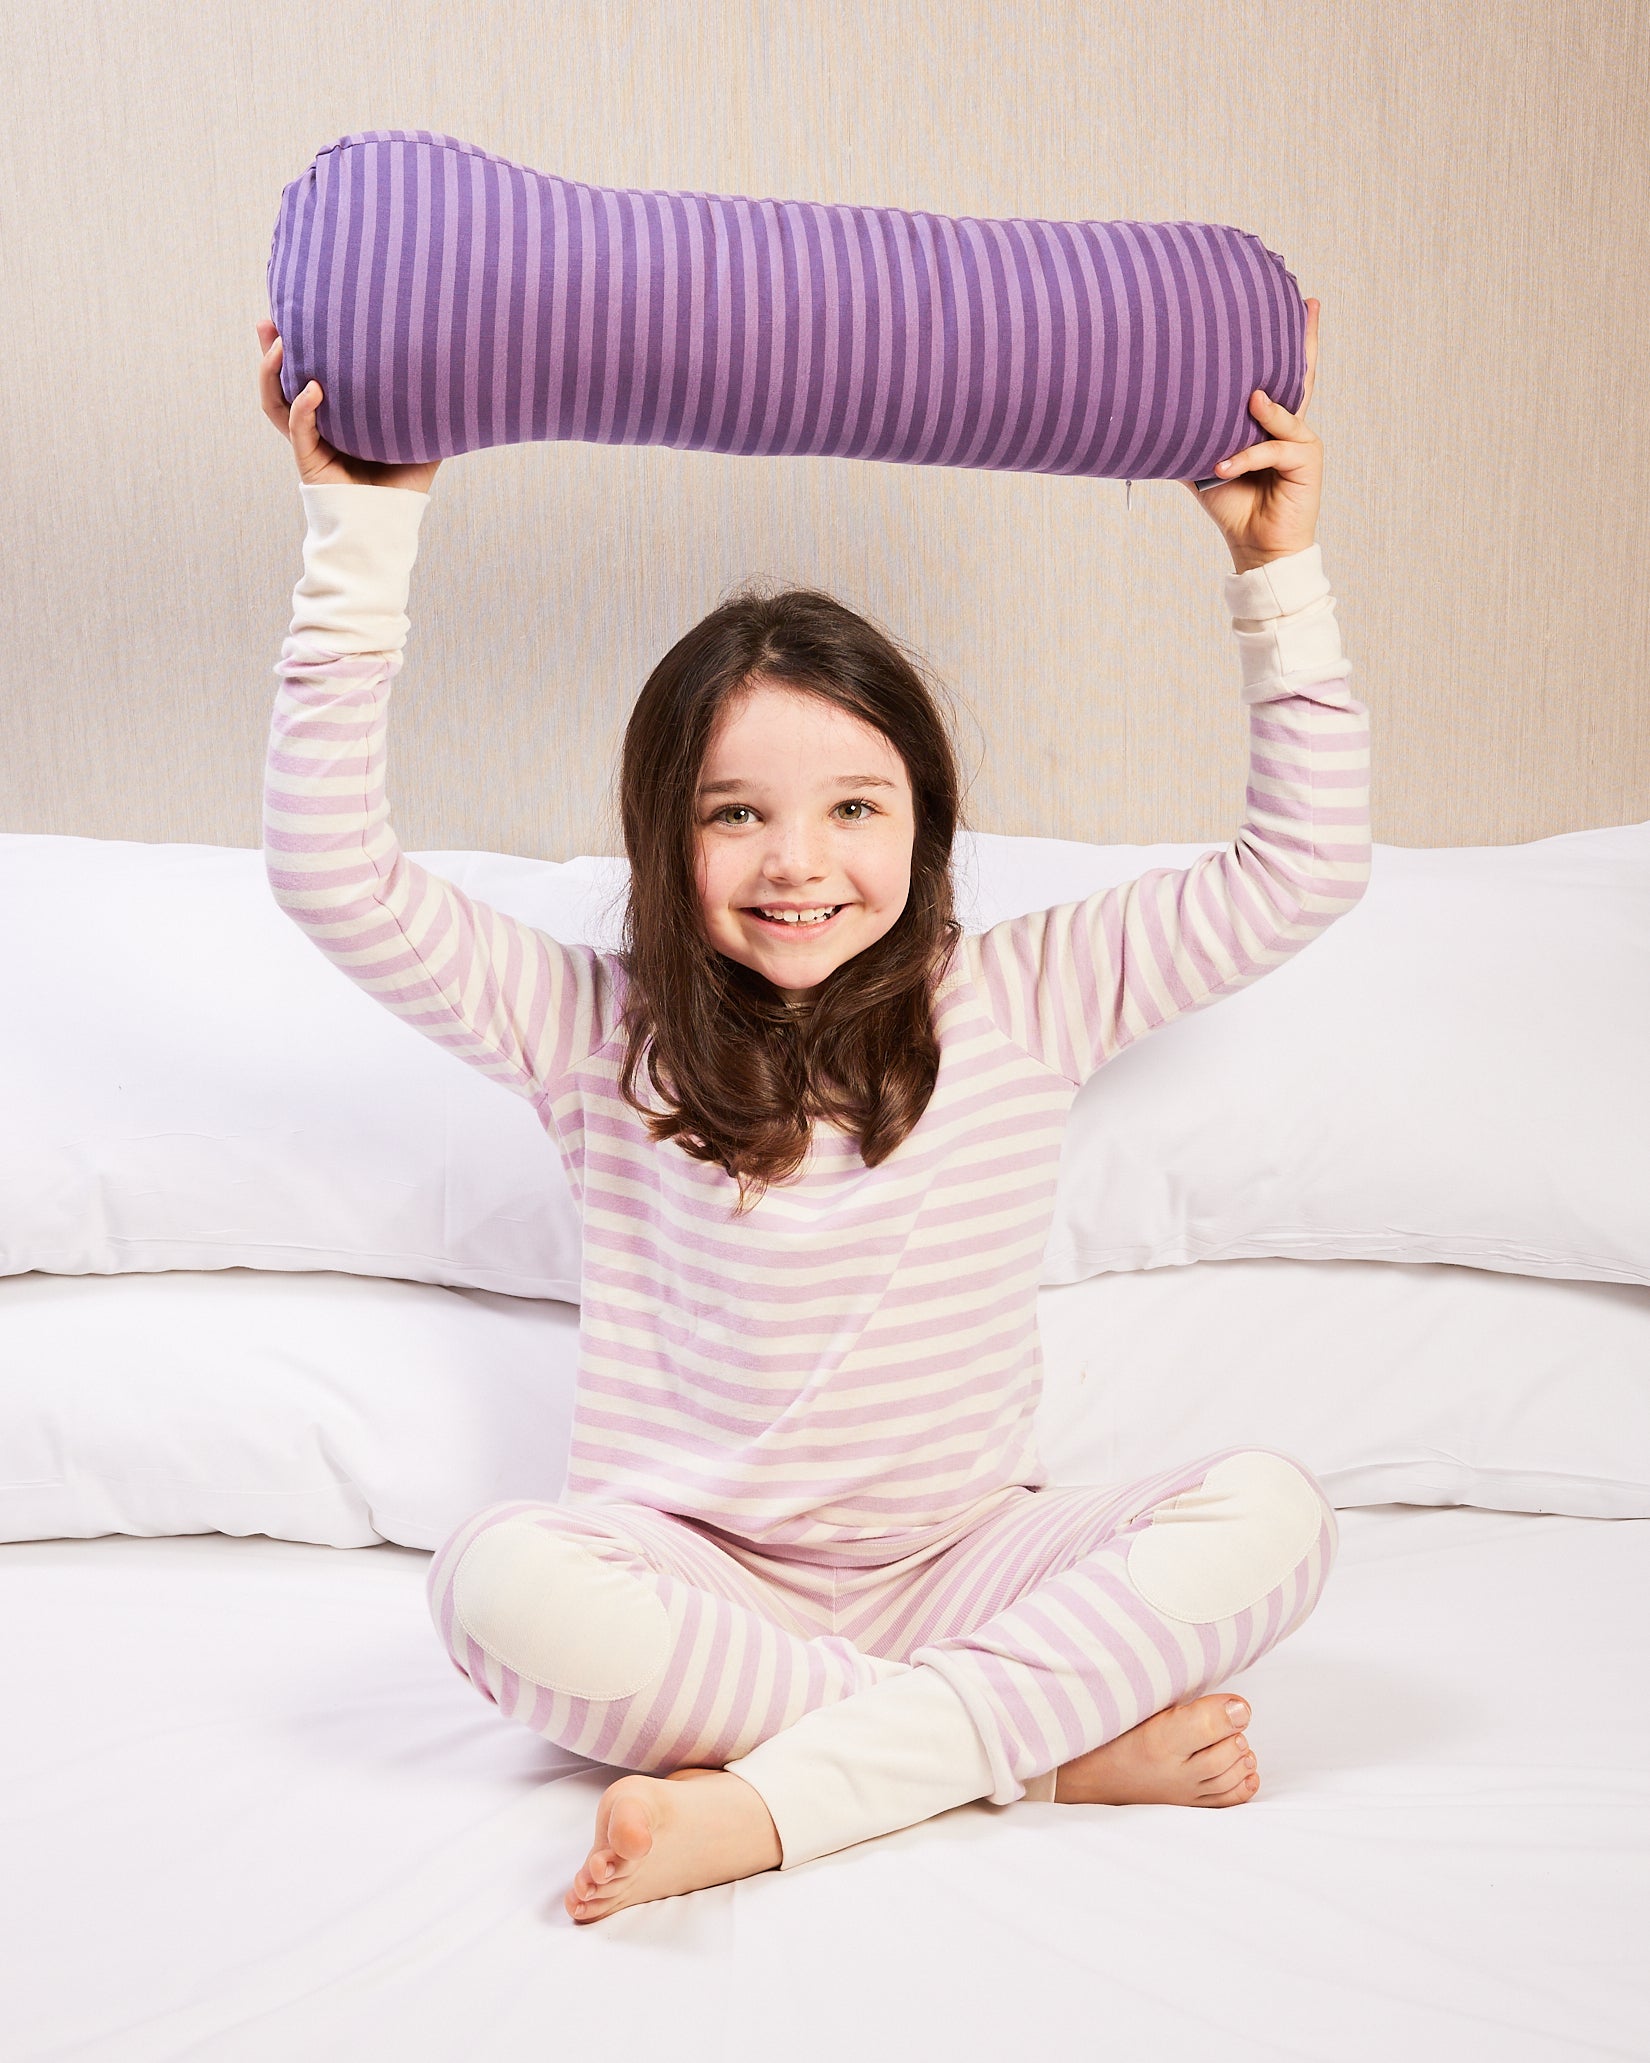 Young girl holding a weighted short pillow above her head